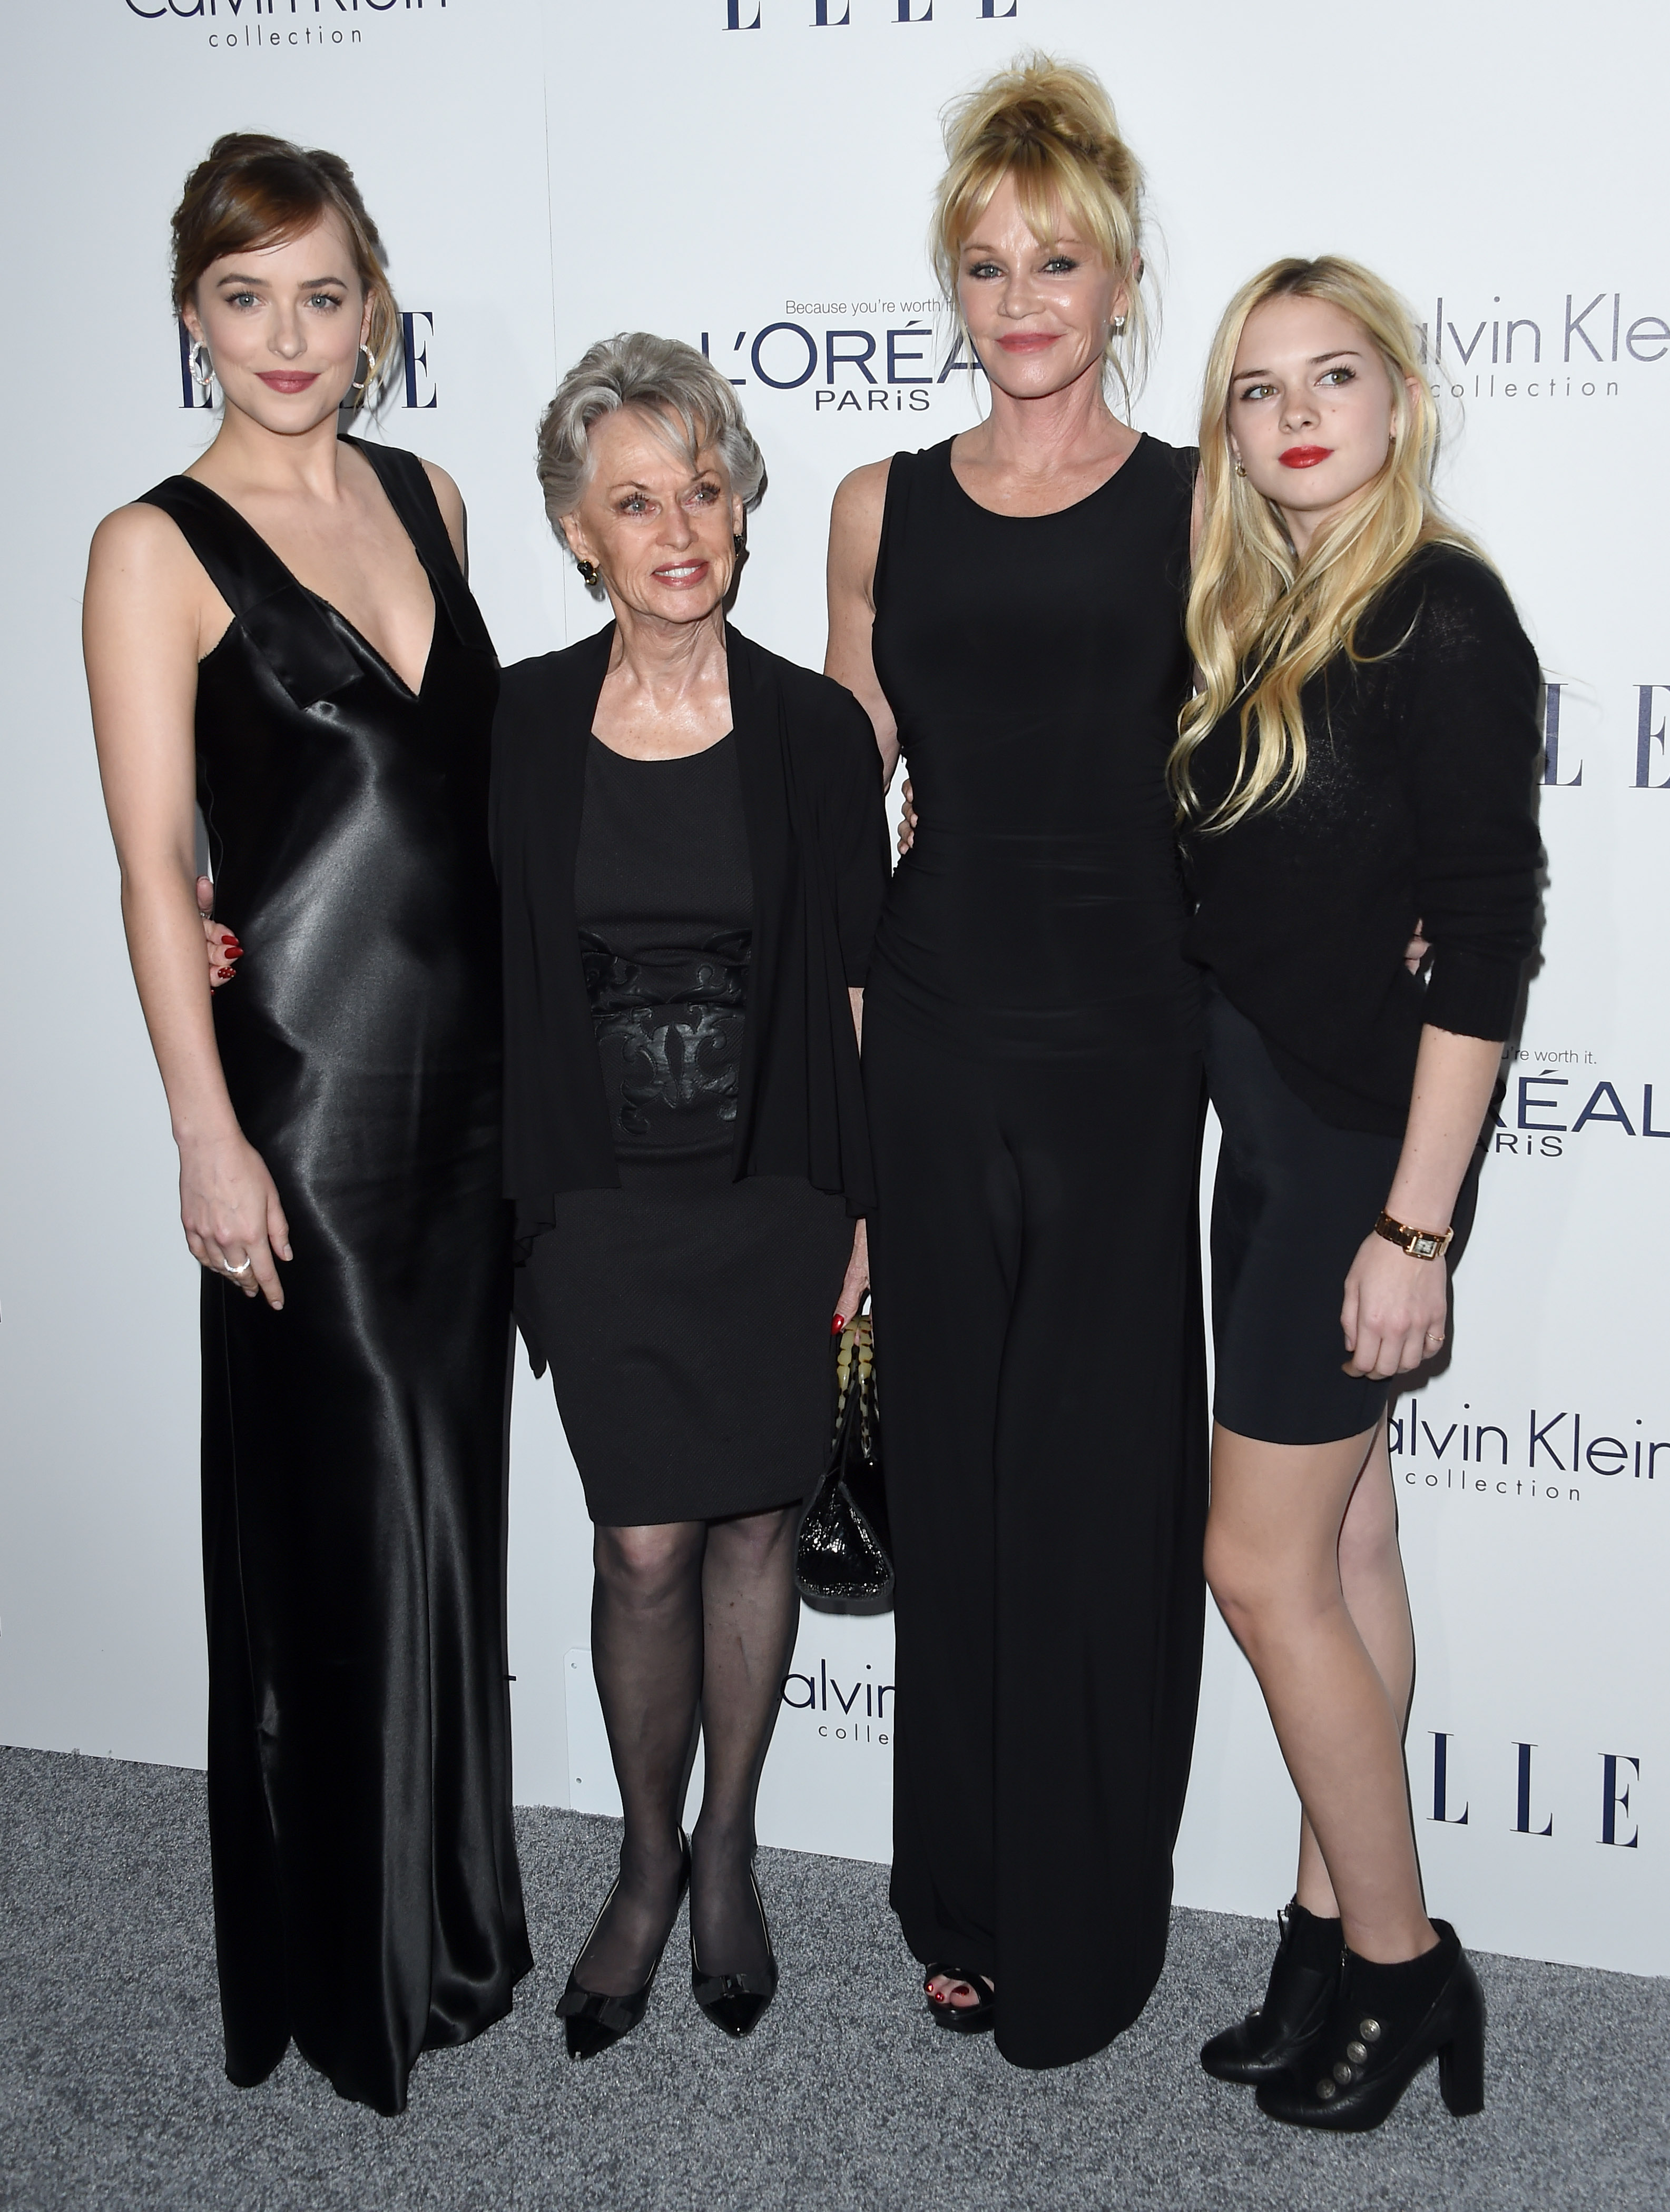 Dakota Johnson, Tippi Hedren, Melanie Griffith, and Stella Banderas at the 22nd Annual Elle Women In Hollywood Awards in Los Angeles, California on October 19, 2015 | Source: Getty Images